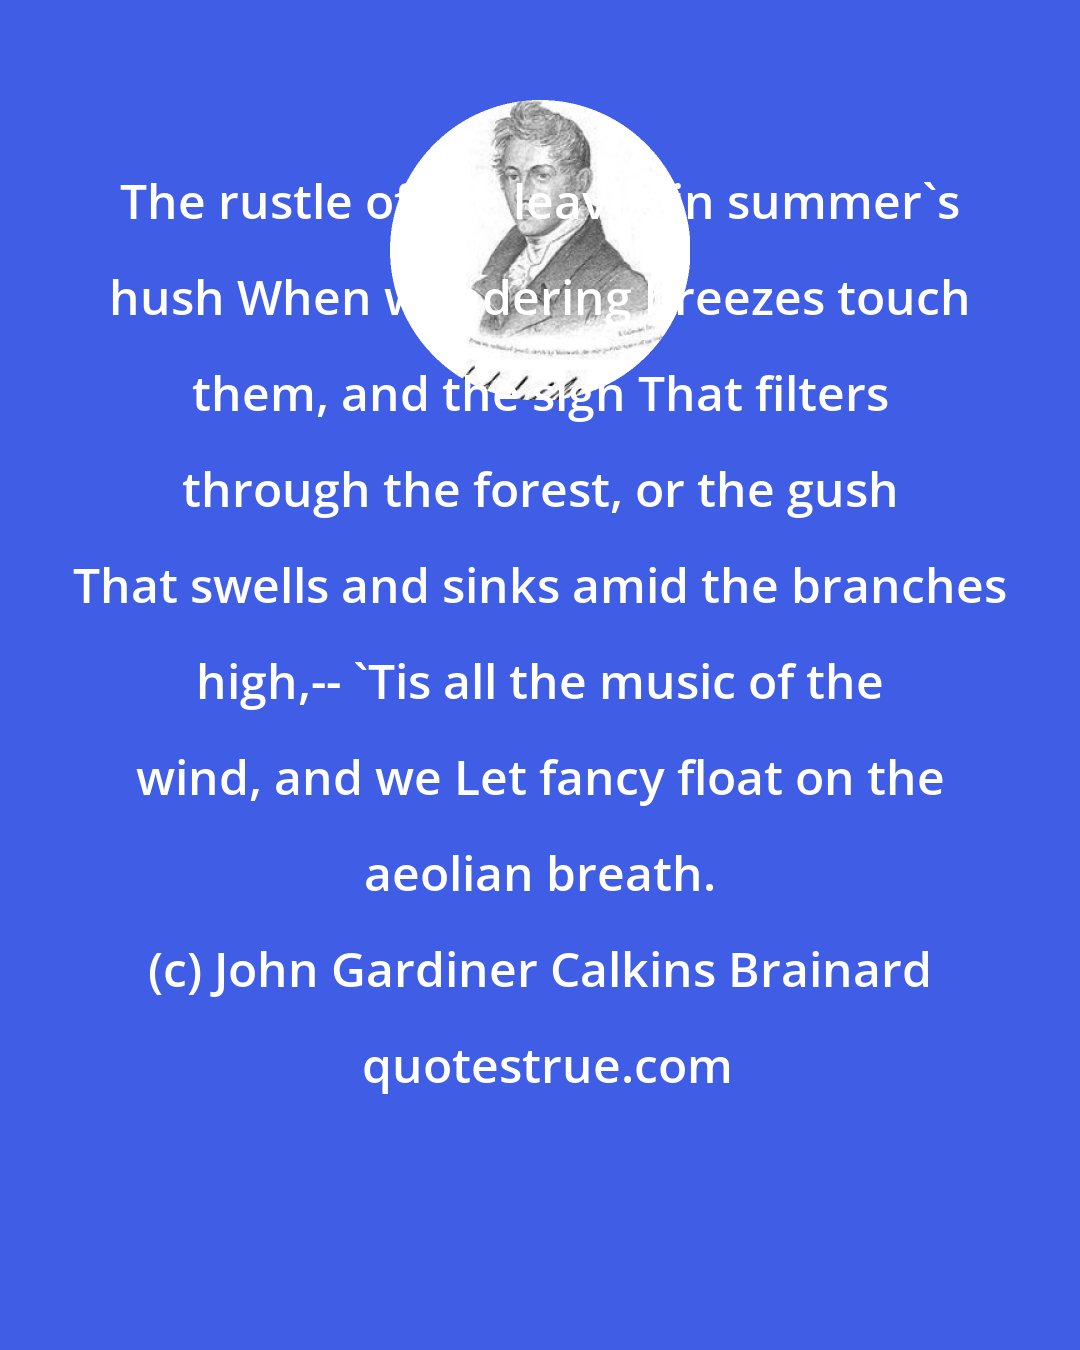 John Gardiner Calkins Brainard: The rustle of the leaves in summer's hush When wandering breezes touch them, and the sigh That filters through the forest, or the gush That swells and sinks amid the branches high,-- 'Tis all the music of the wind, and we Let fancy float on the aeolian breath.